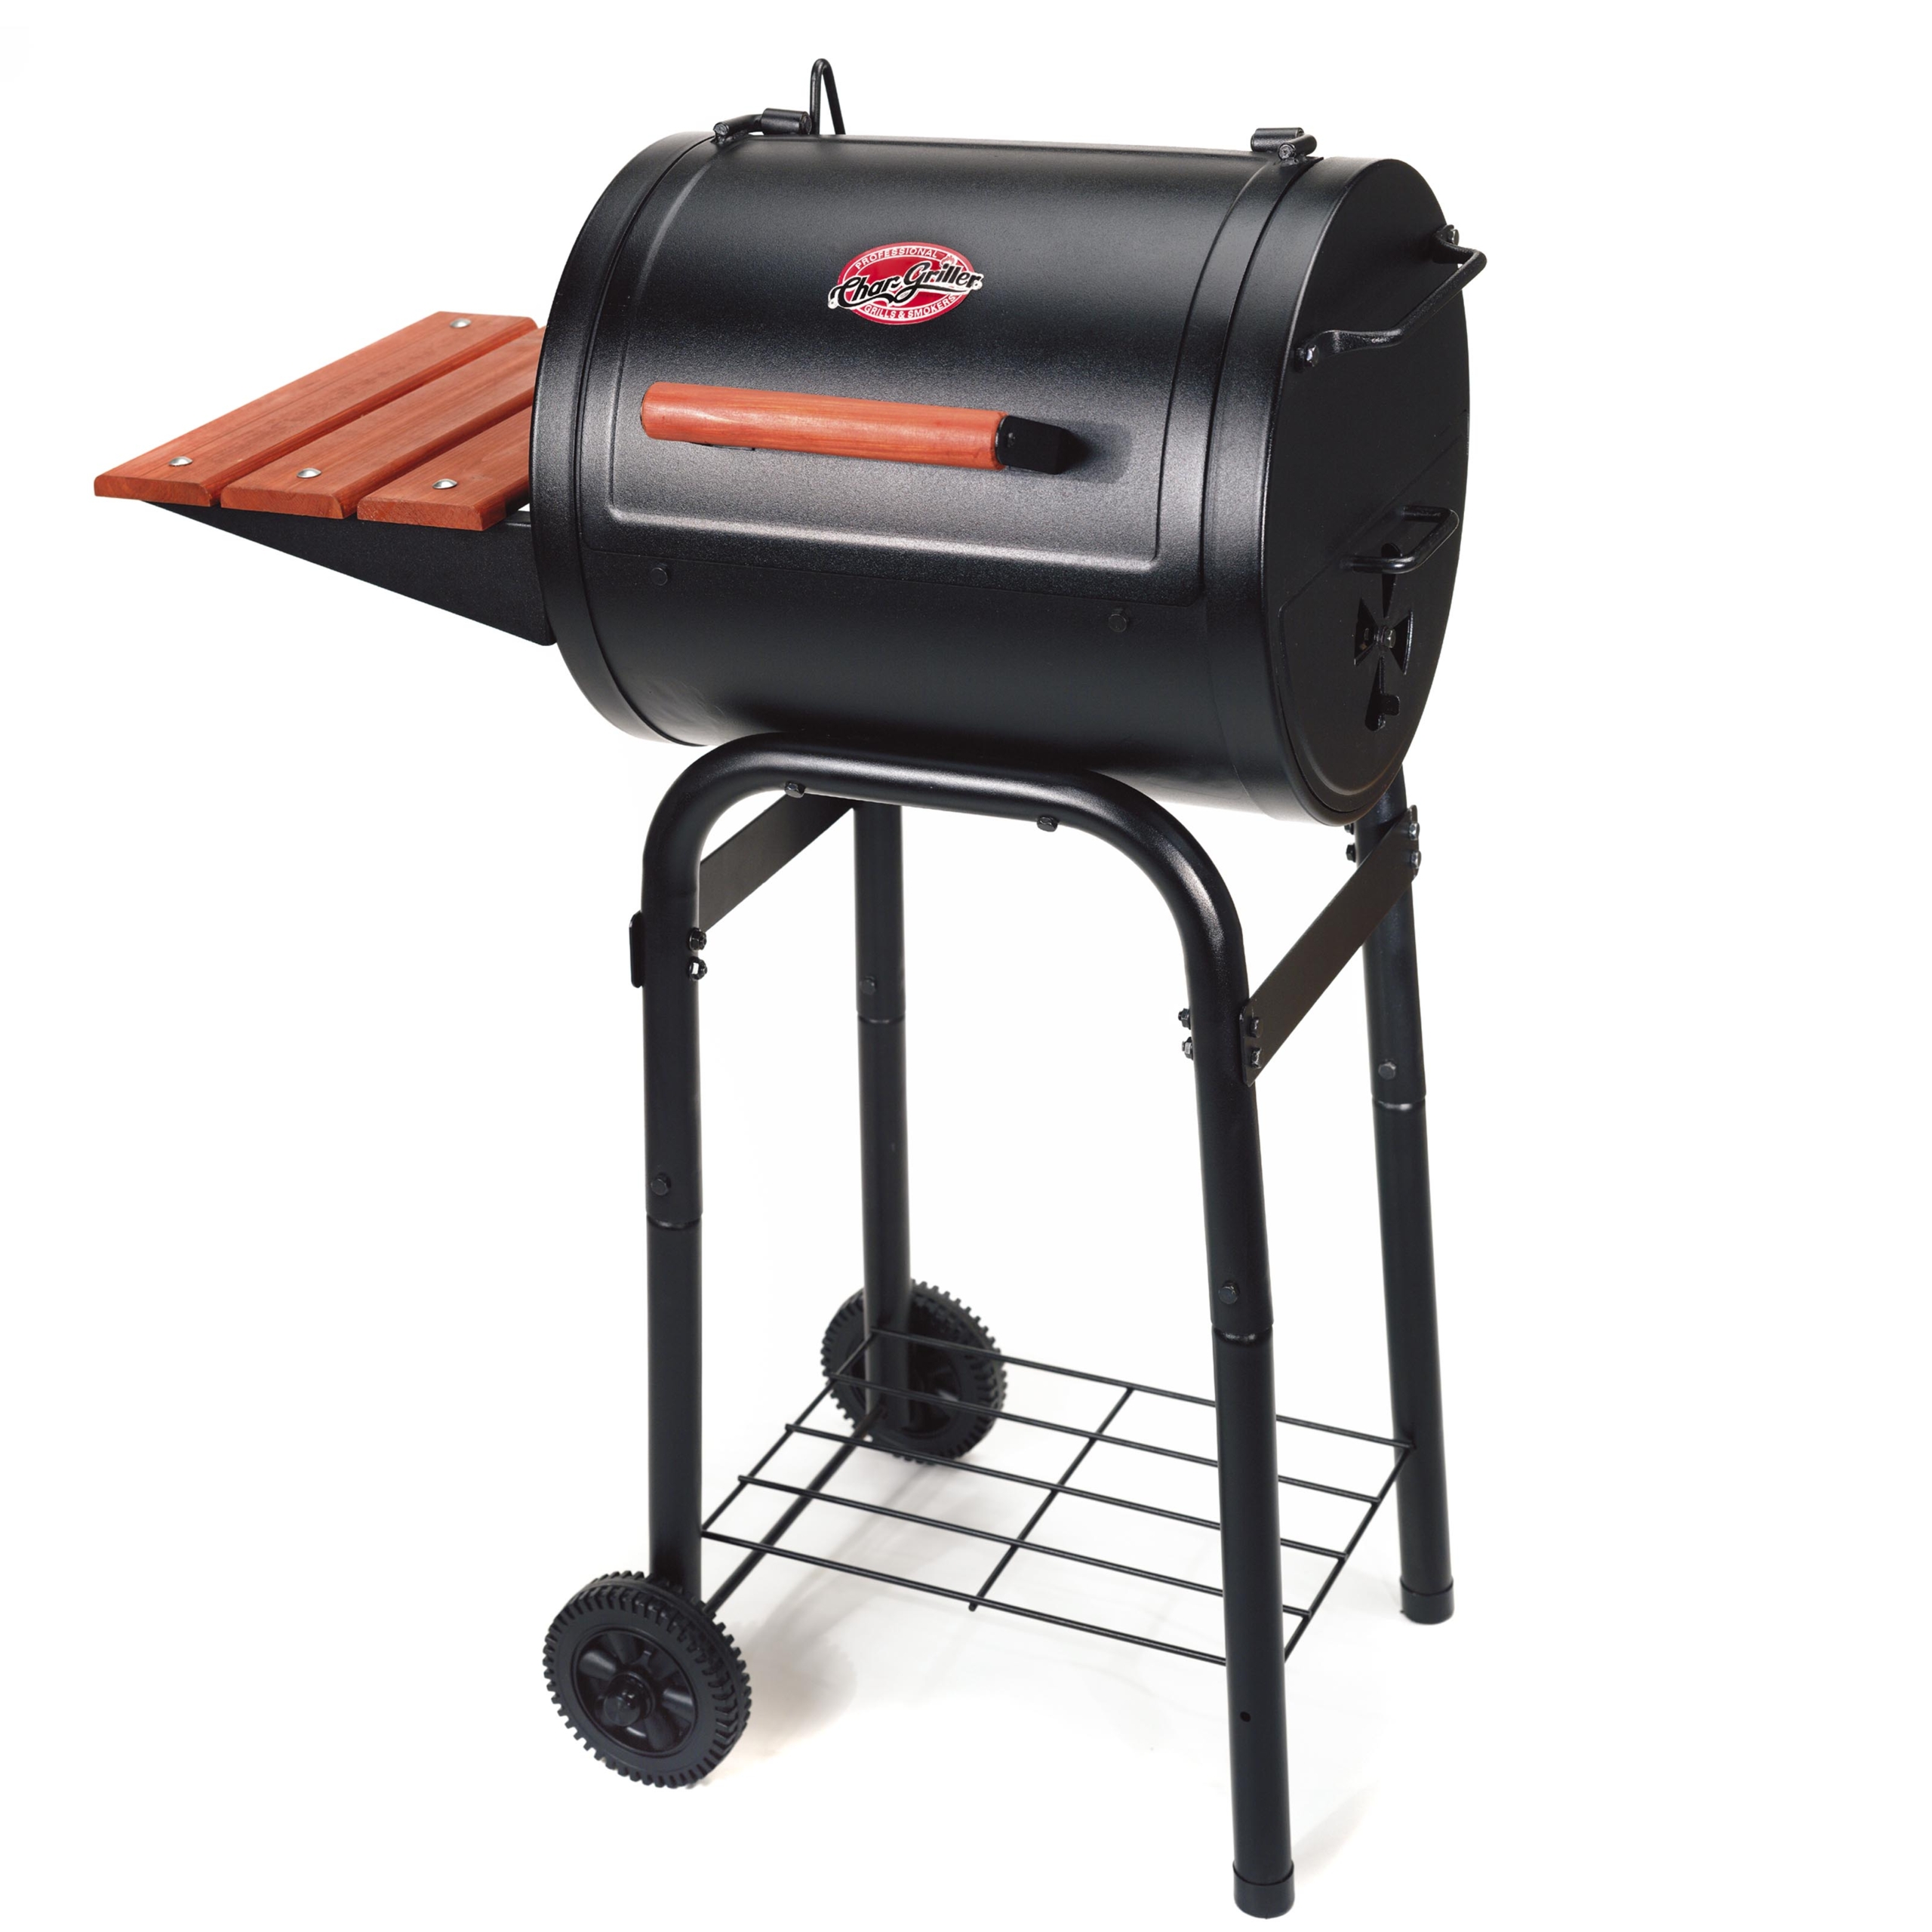 Black Steel Charcoal Grill with Side Shelves